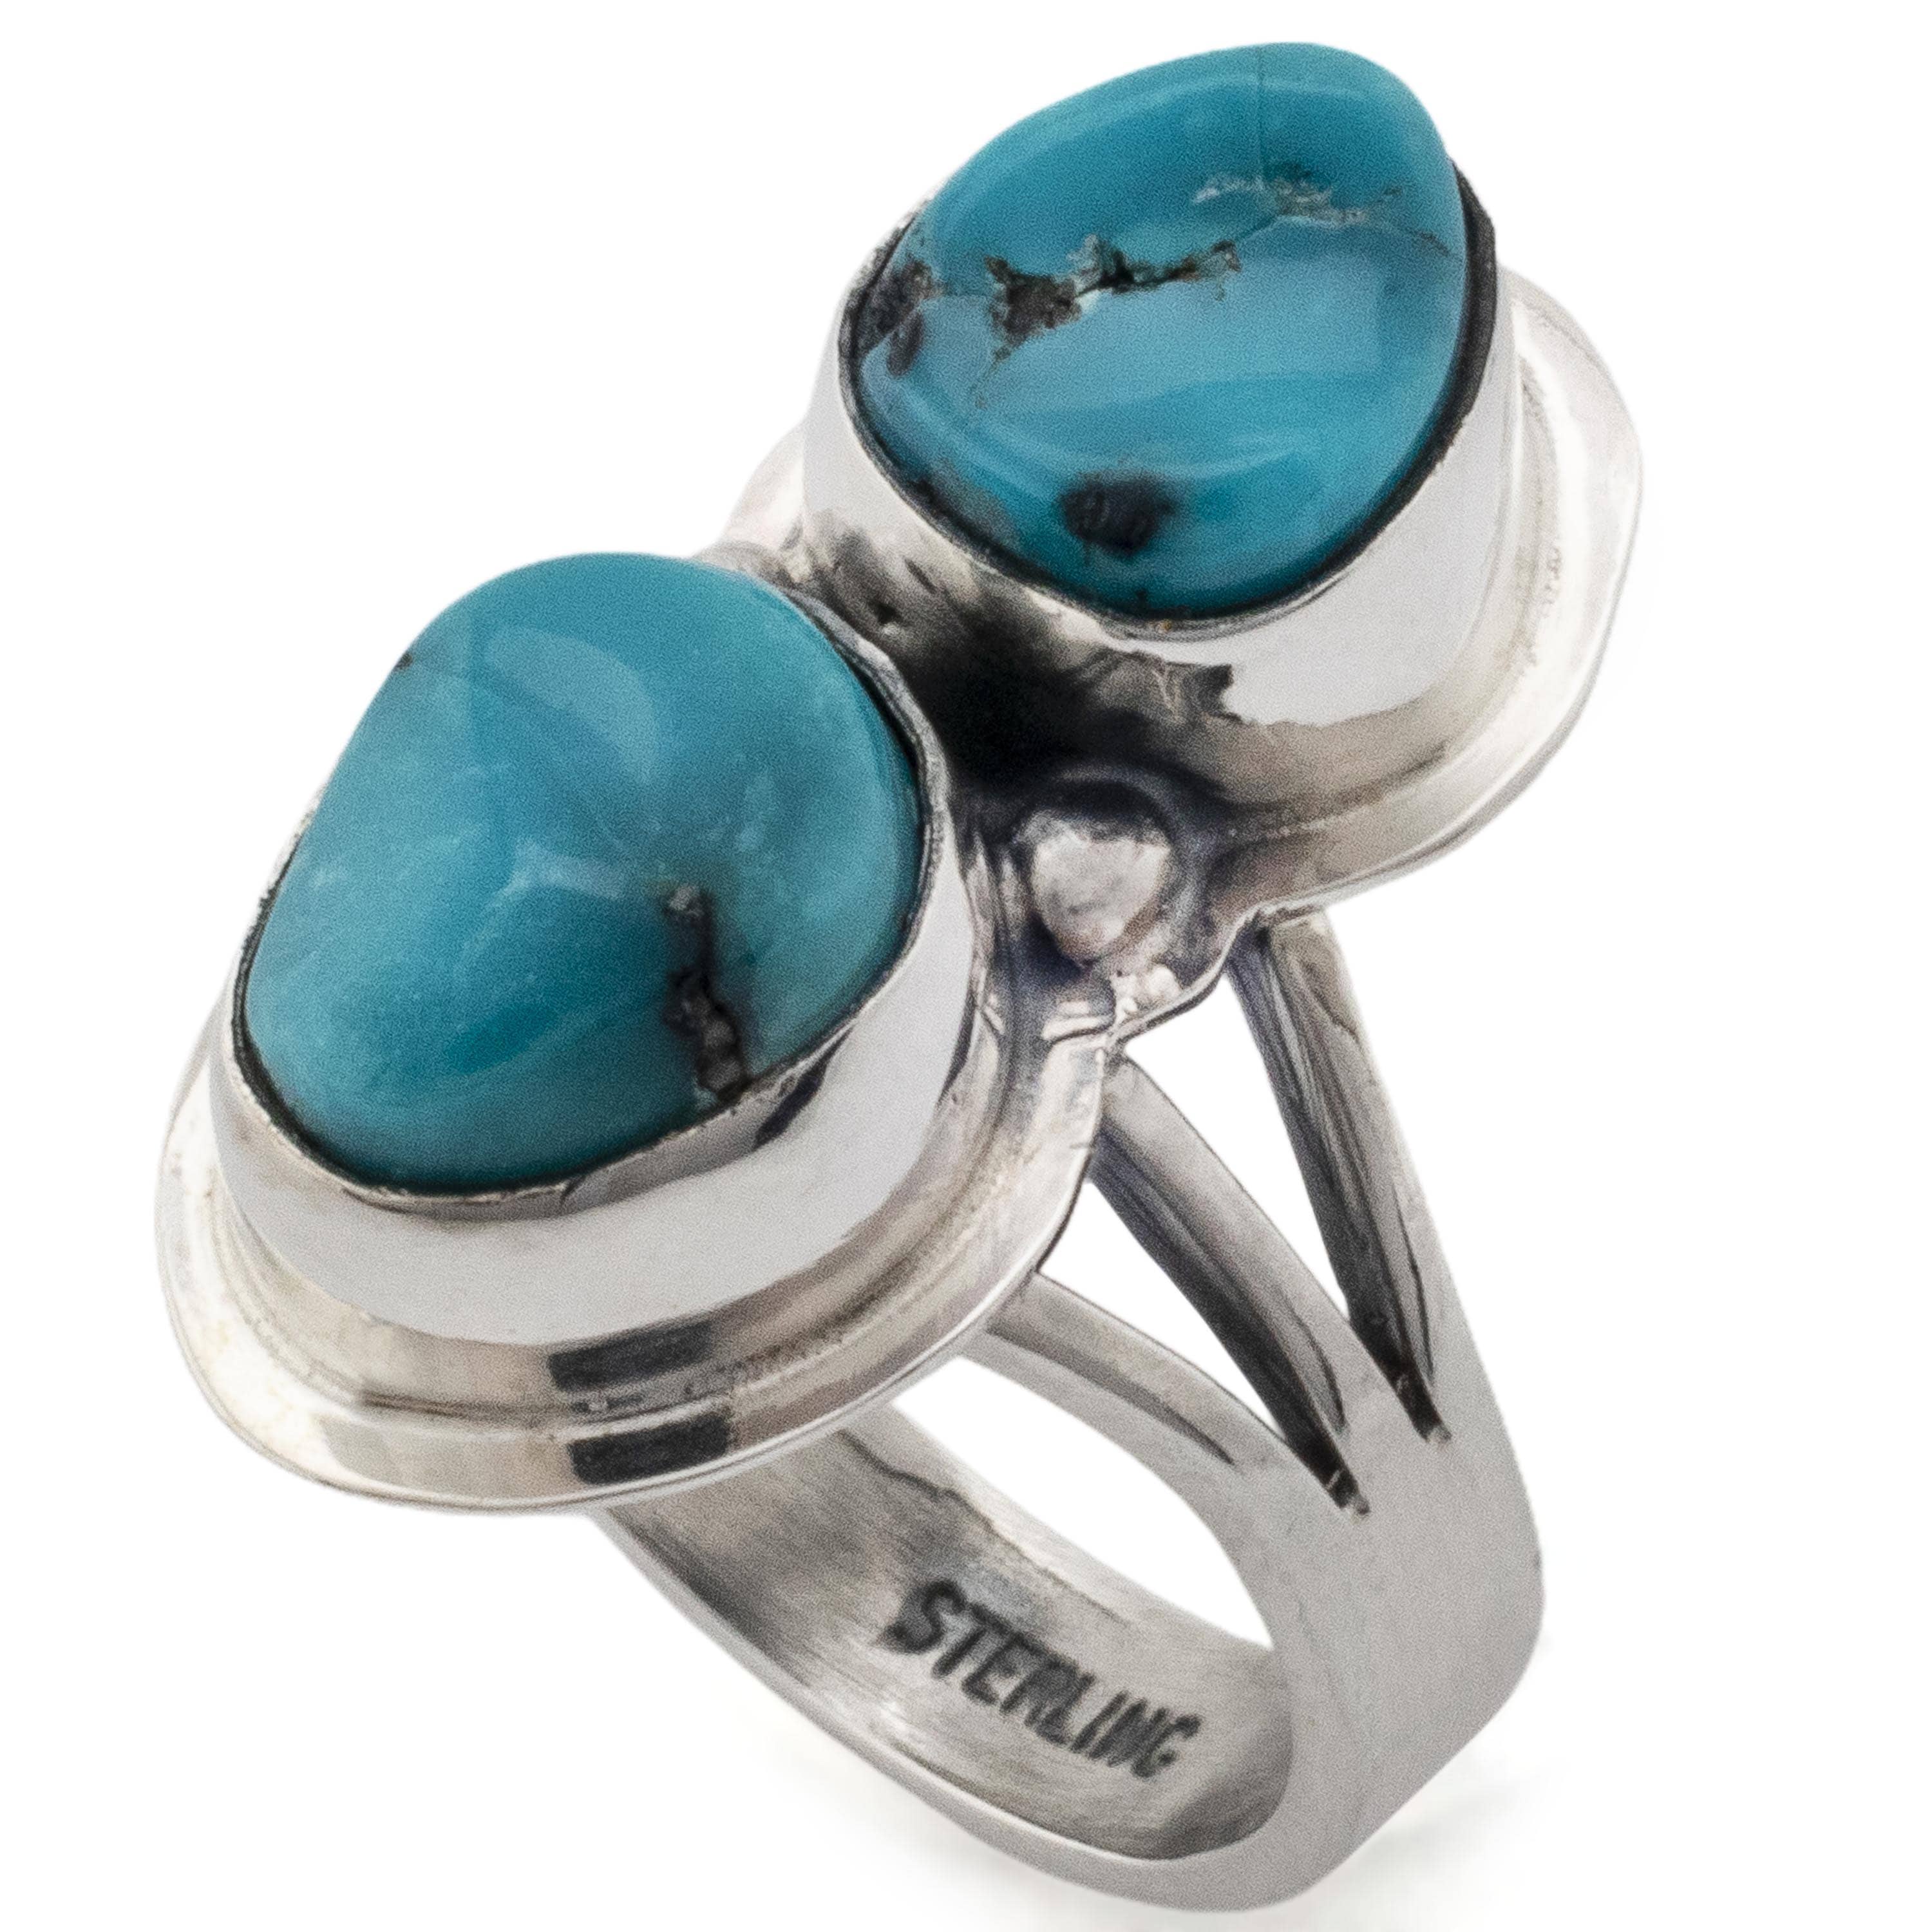 Kalifano Native American Jewelry 7 Double Stone King Manassa Turquoise USA Handmade 925 Sterling Silver Ring NAR350.009.7